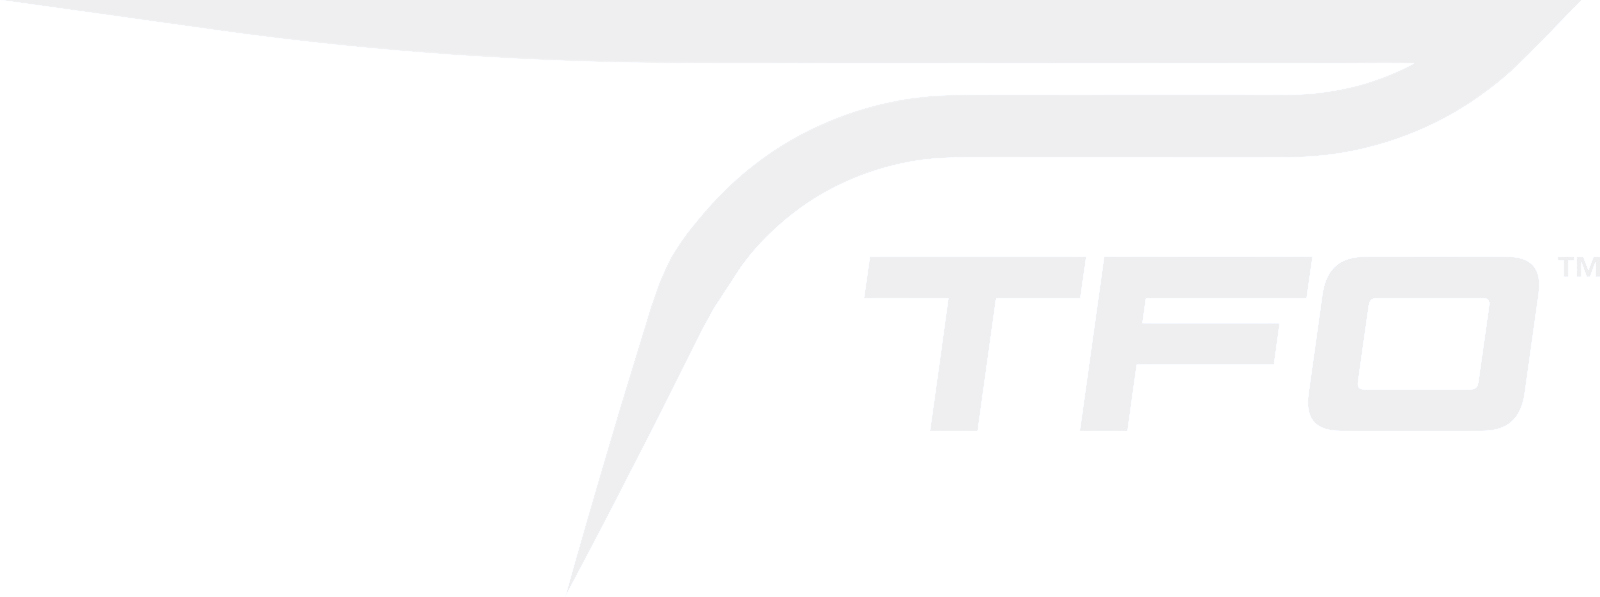 tfo-logo-t-mark-initials-bottom - Edited-2.png